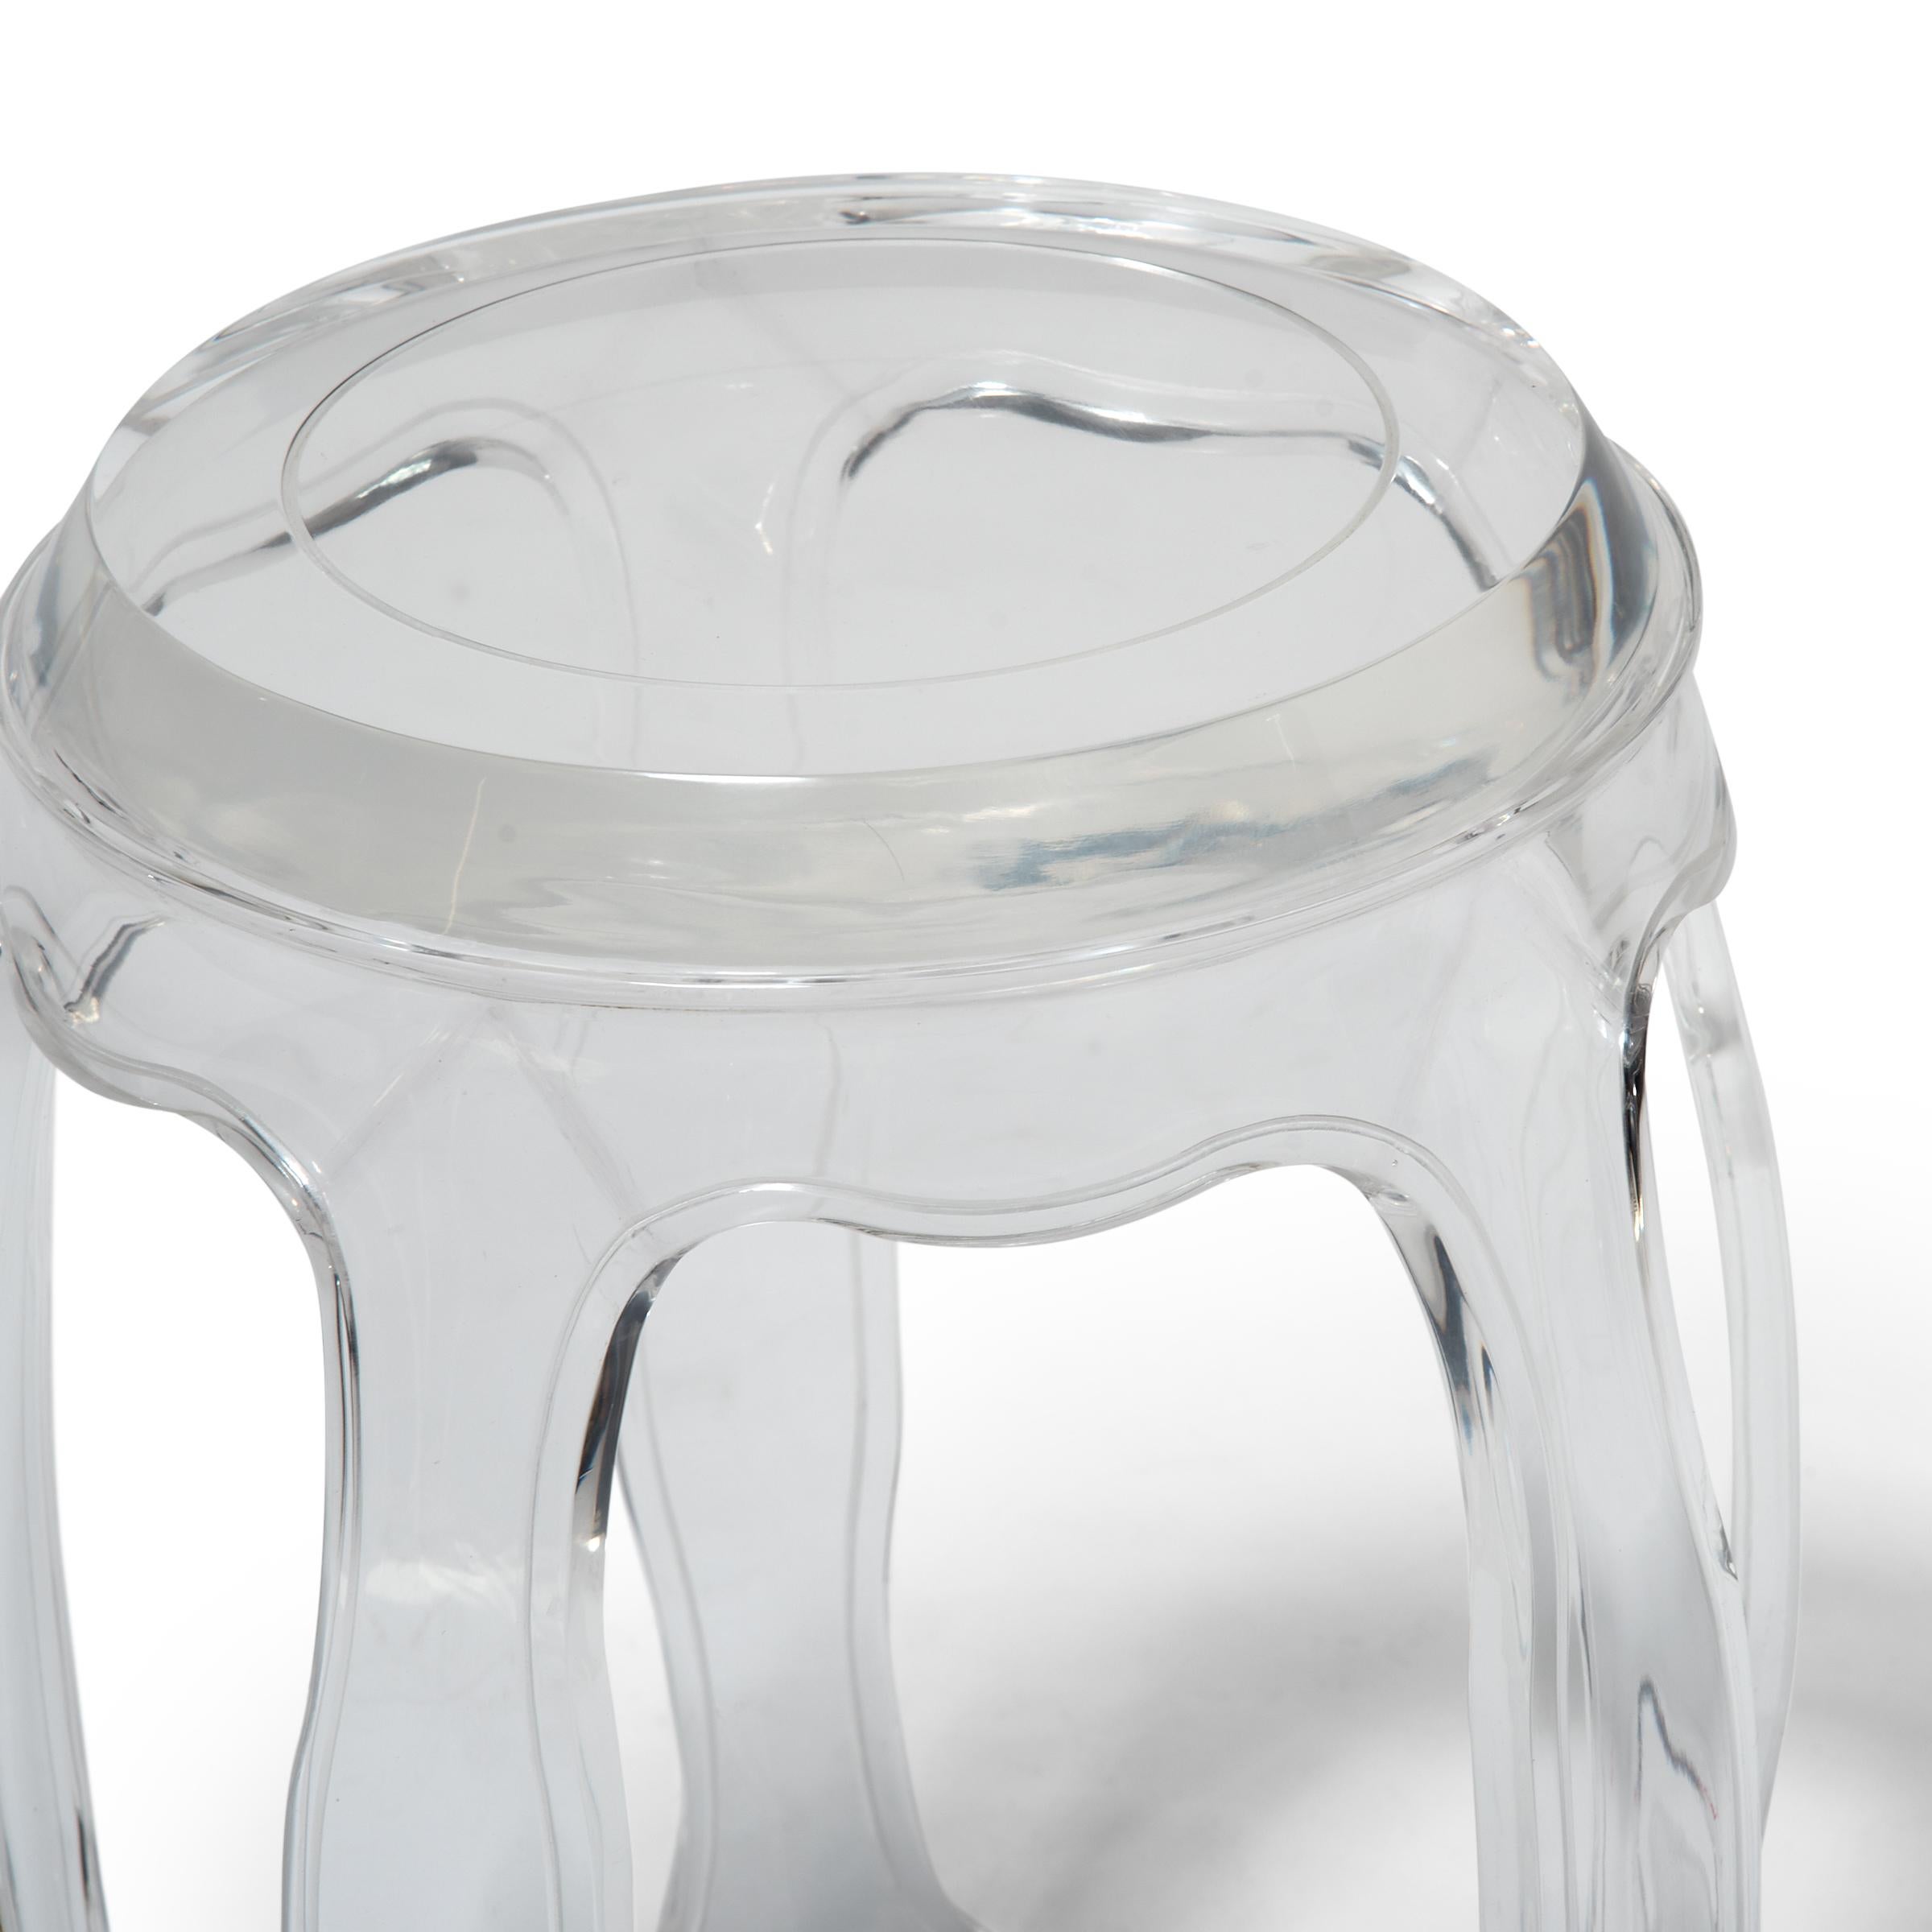 Chinese Invisible Drum Stool by July Zhou